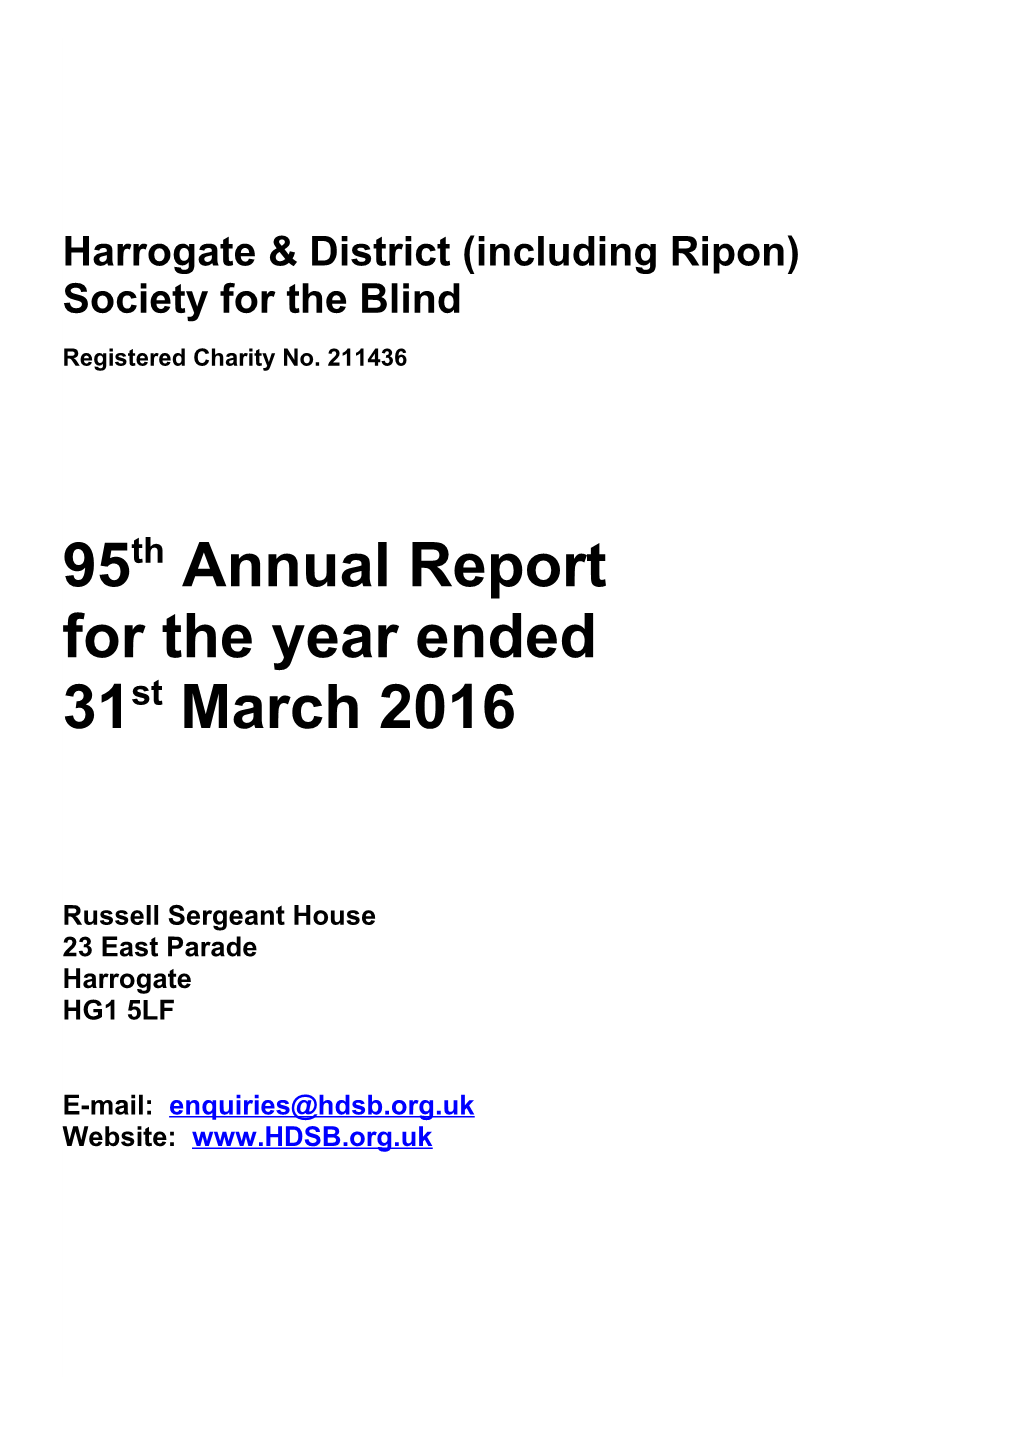 Harrogate & District (Including Ripon) Society for the Blind